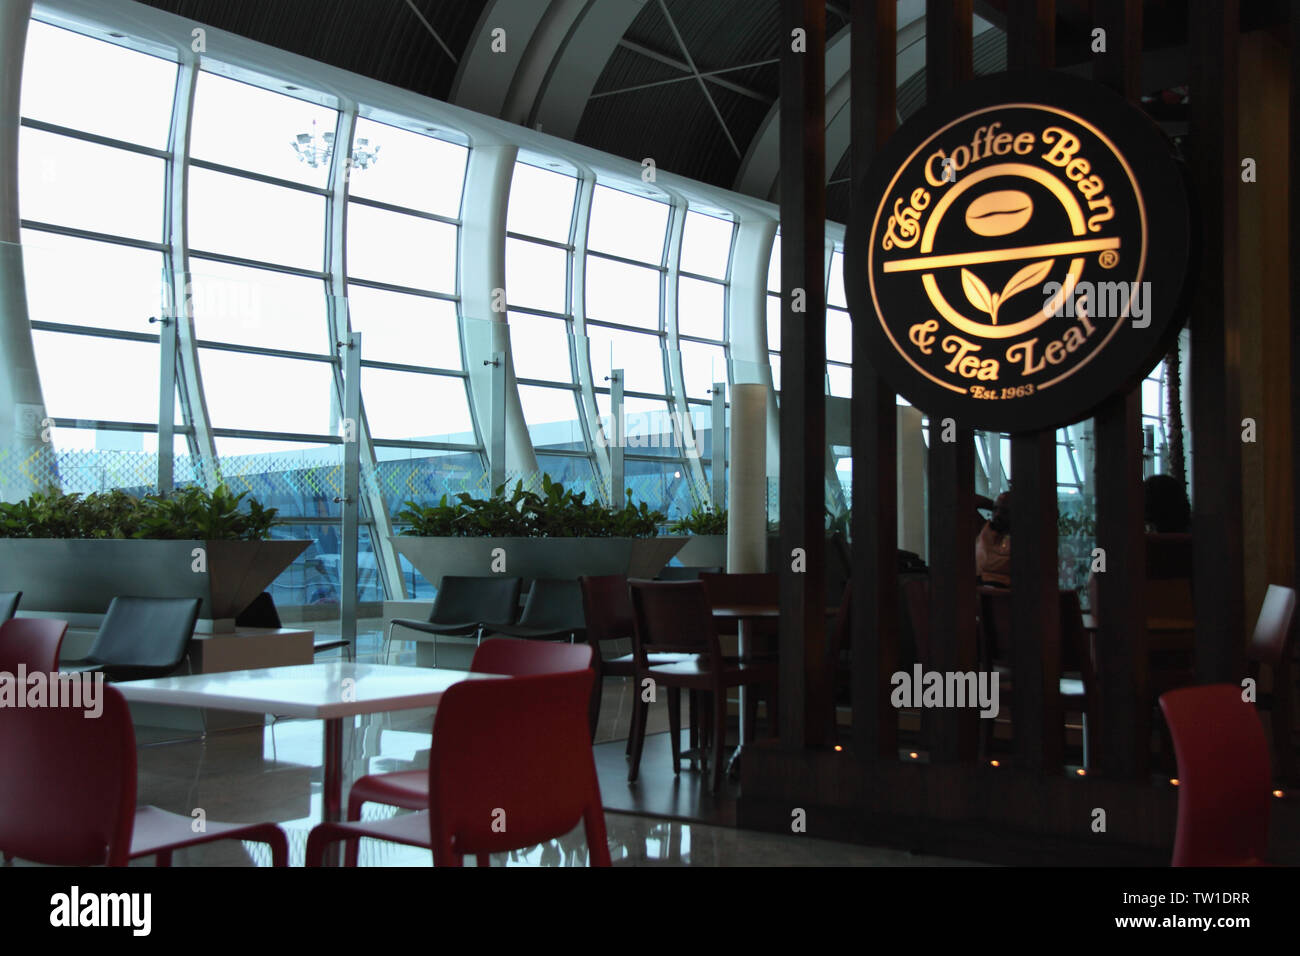 Cafe in an airport, India Stock Photo